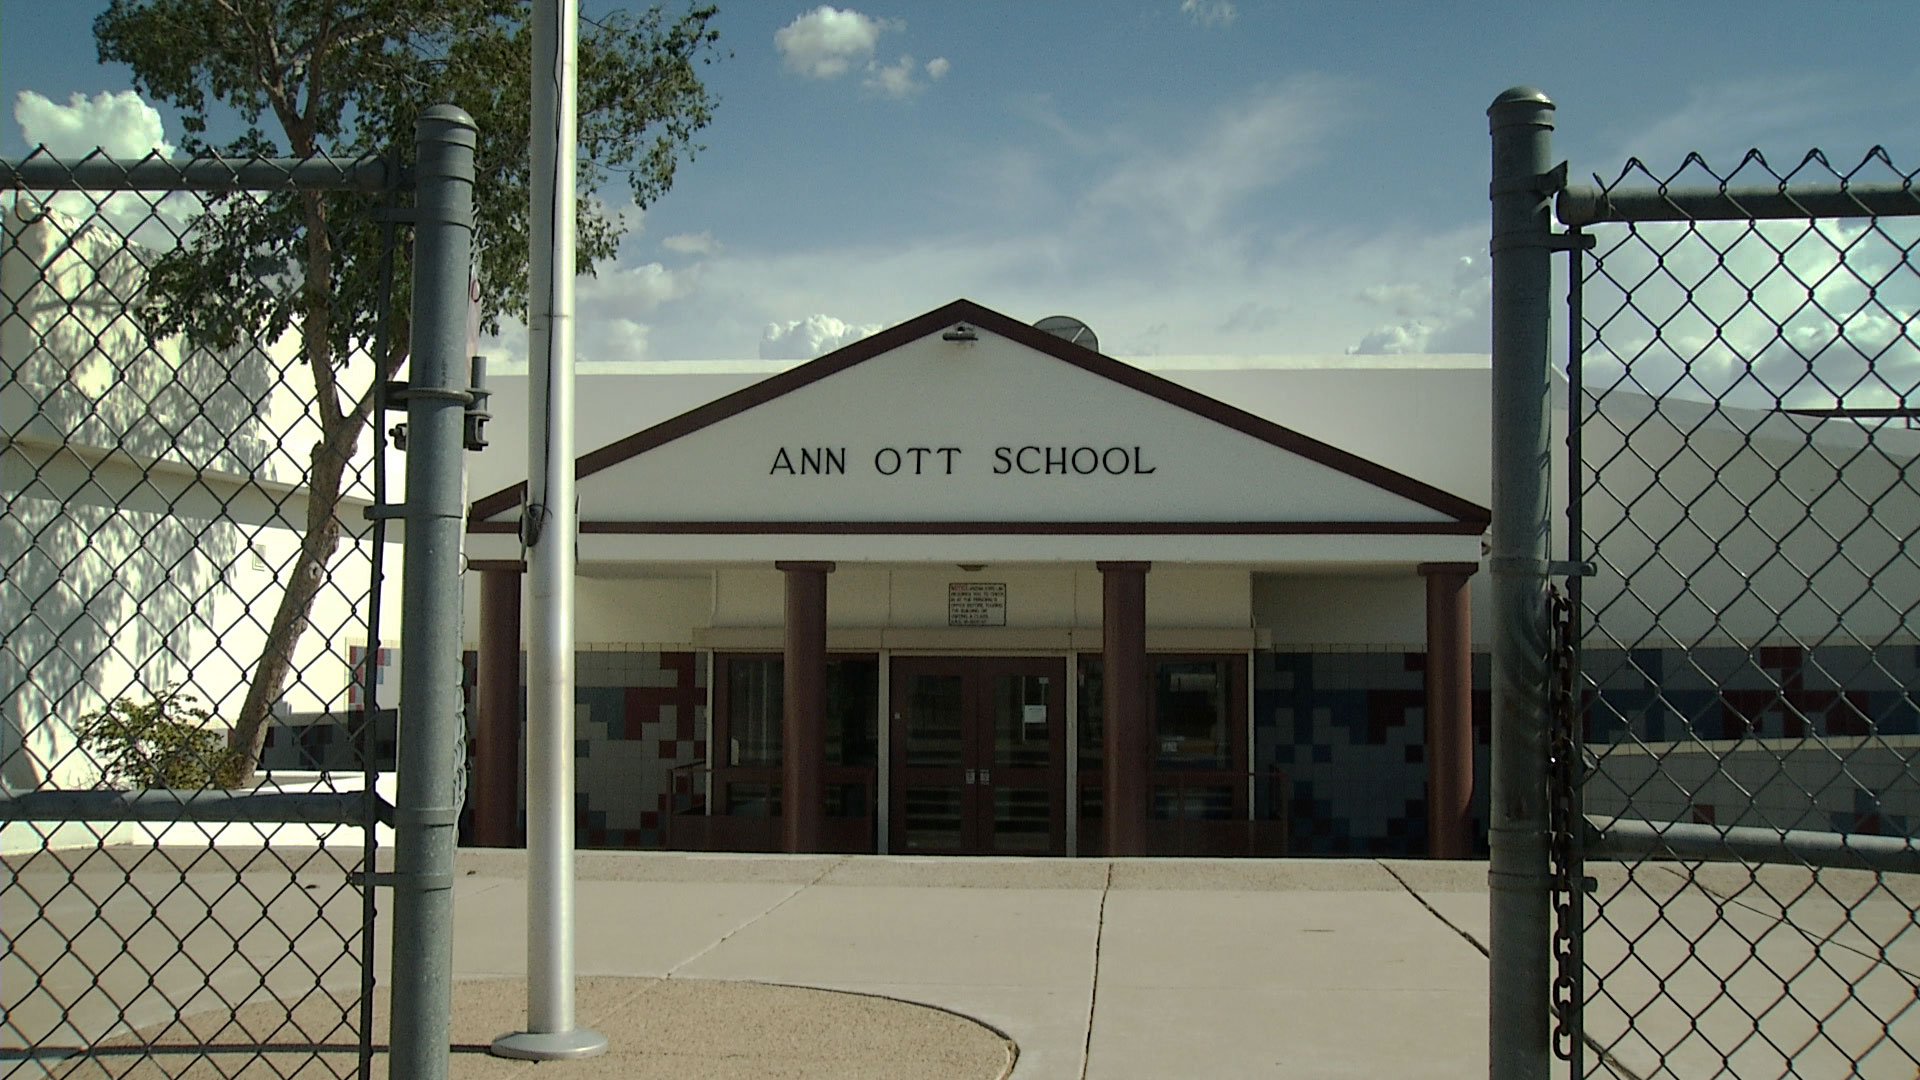 The former Ann Ott Elementary School in Phoenix became a shelter for asylum-seeking families in July. The International Rescue Committee is overseeing renovations and operations at the shelter. 